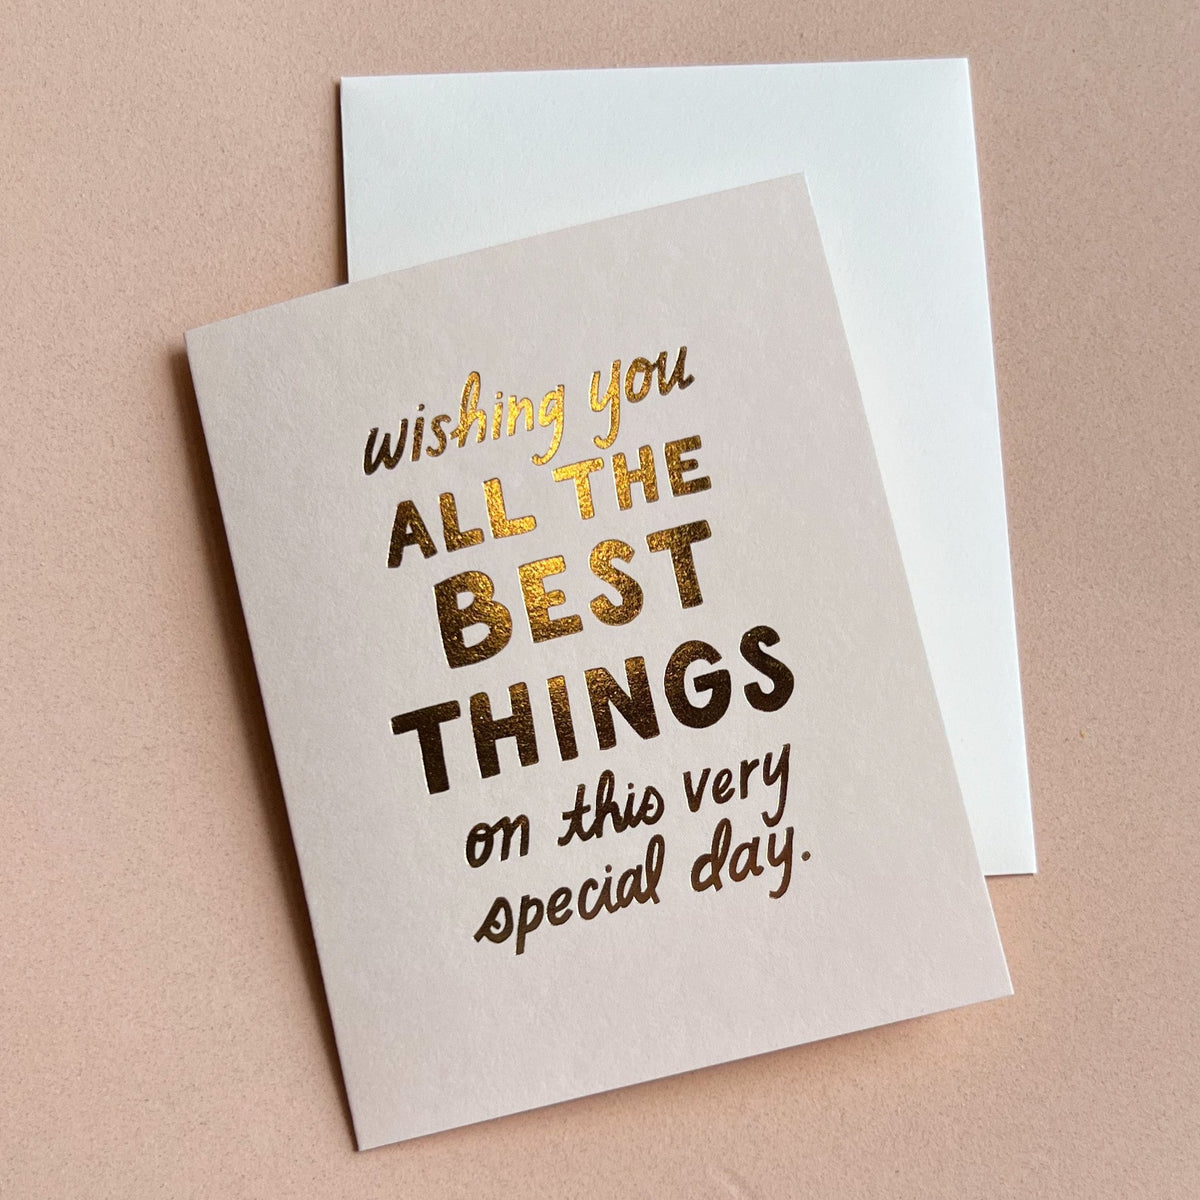 All The Best Things Card